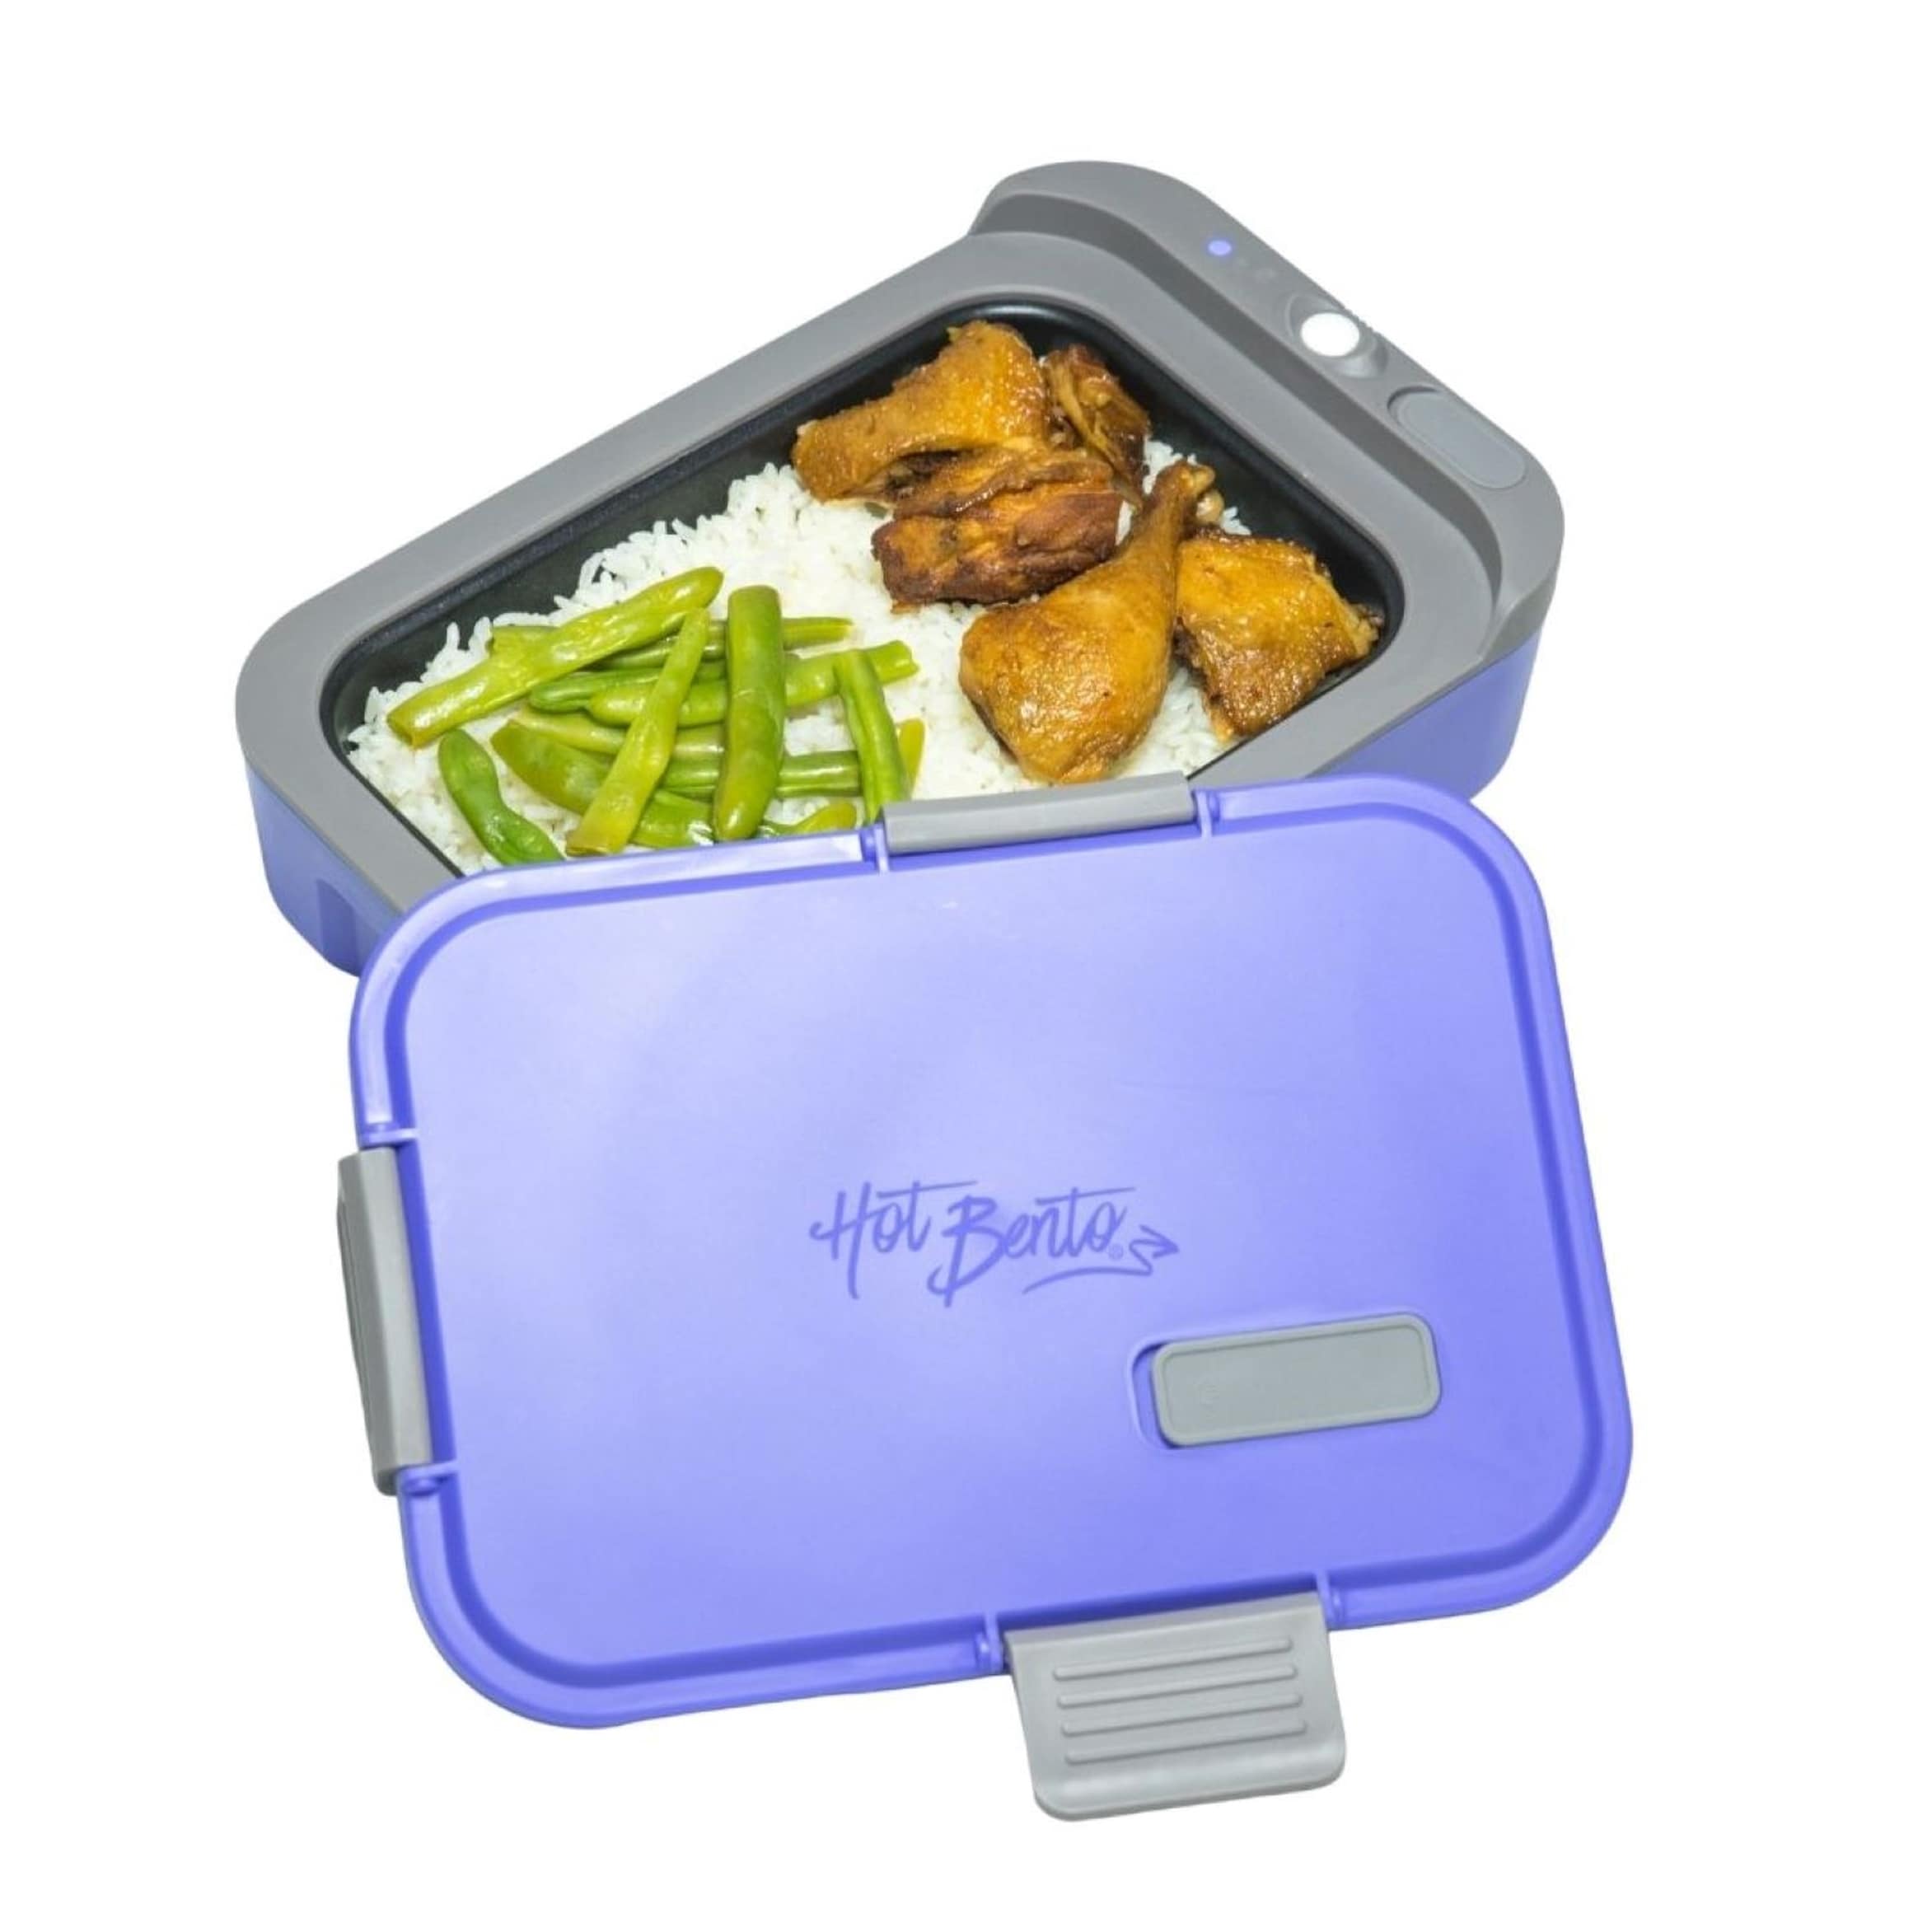 Dropship Lunch Box For Kids And Adults Bento Box Leakproof Lunch Containers  With Removable Stainless-Steel Tray For School Work Outdoors Microwave Safe  to Sell Online at a Lower Price